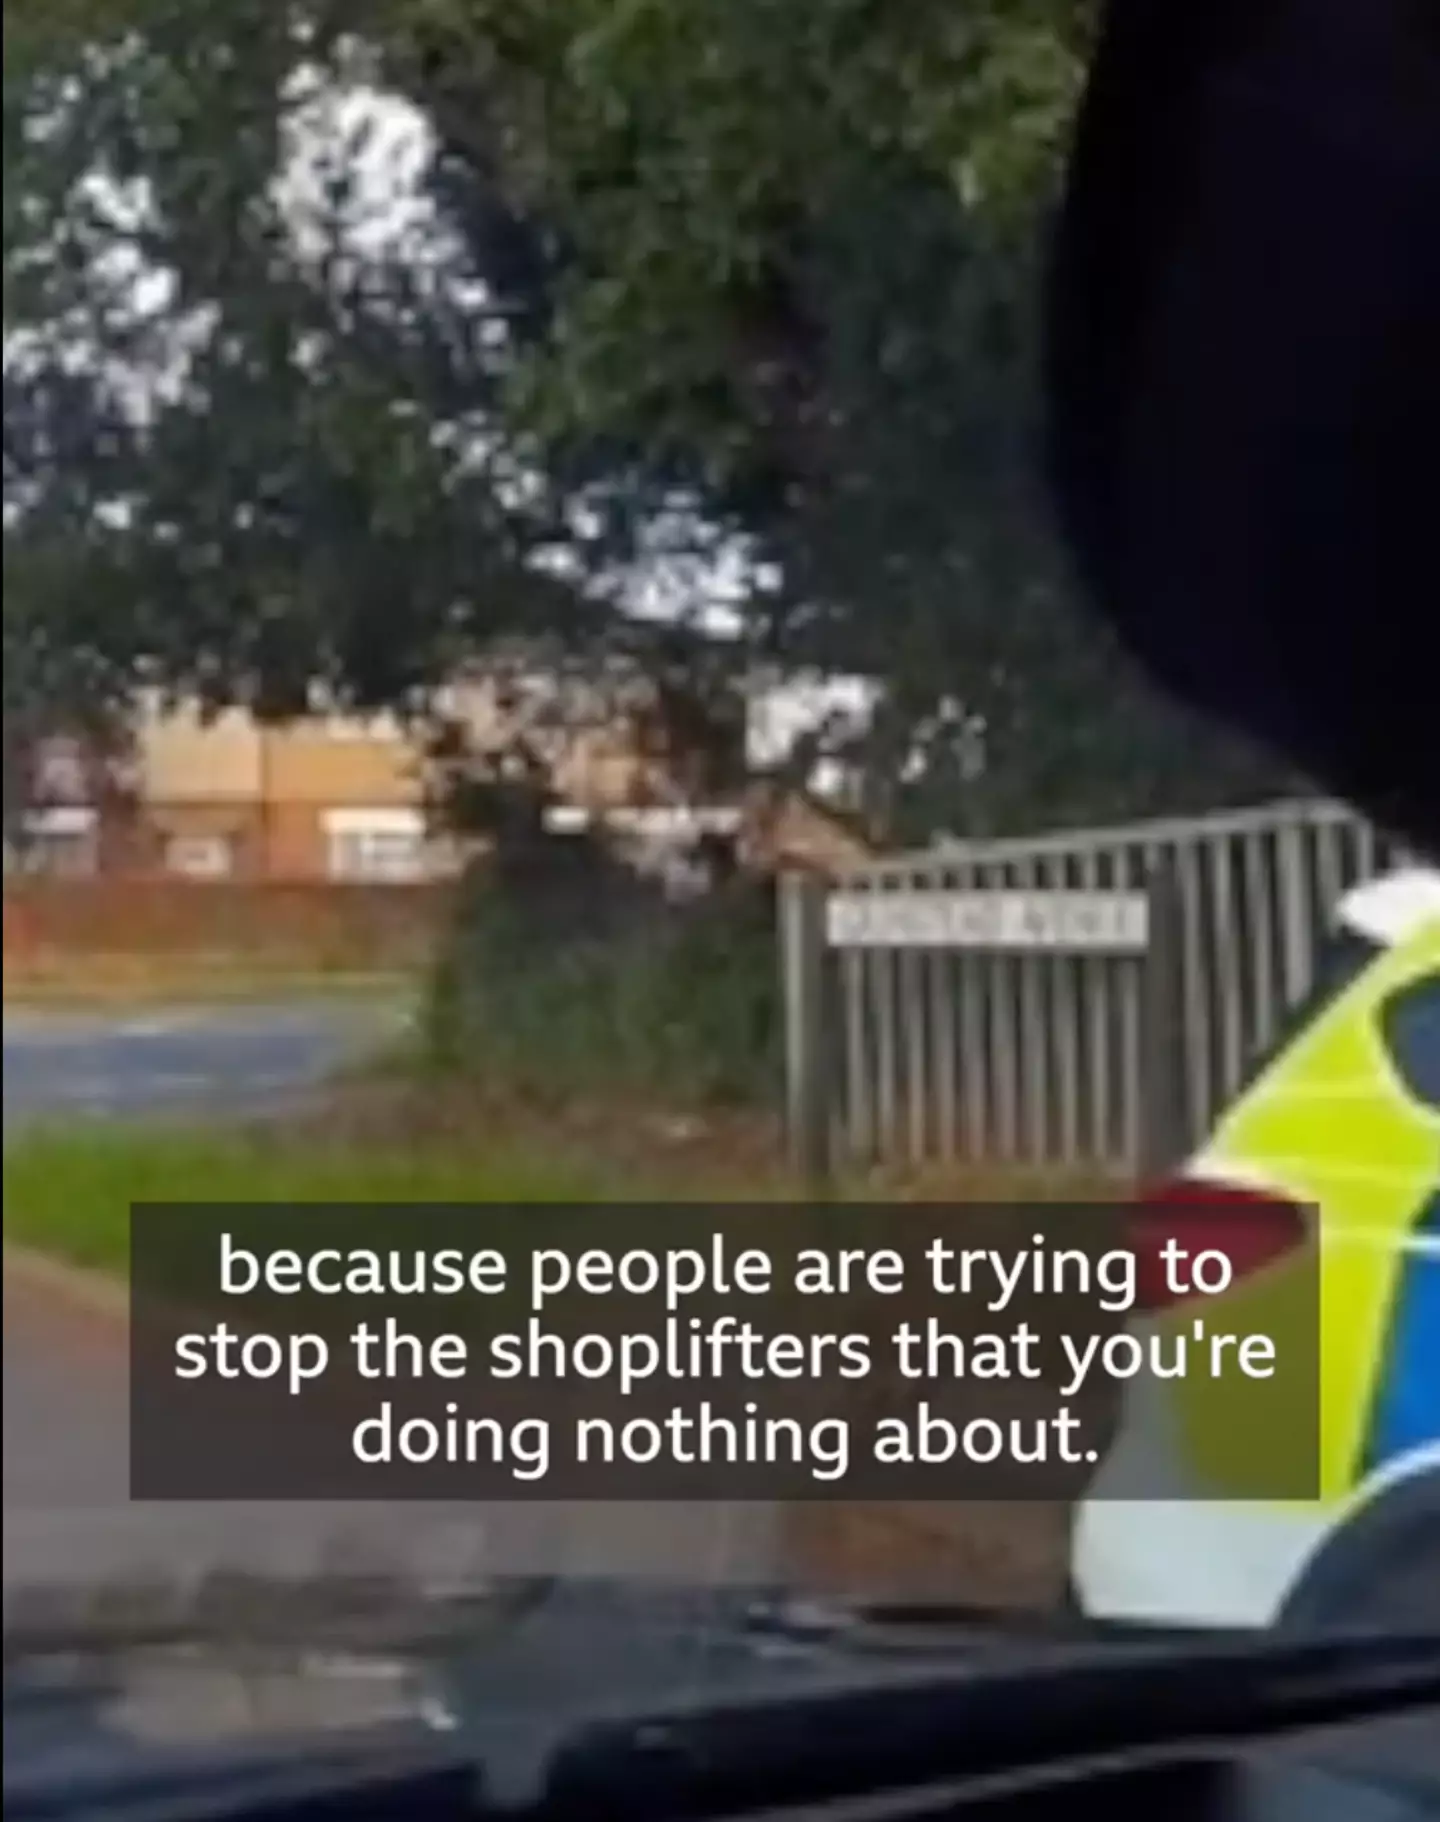 A member of the public told the PCSO to get involved, but he refused.